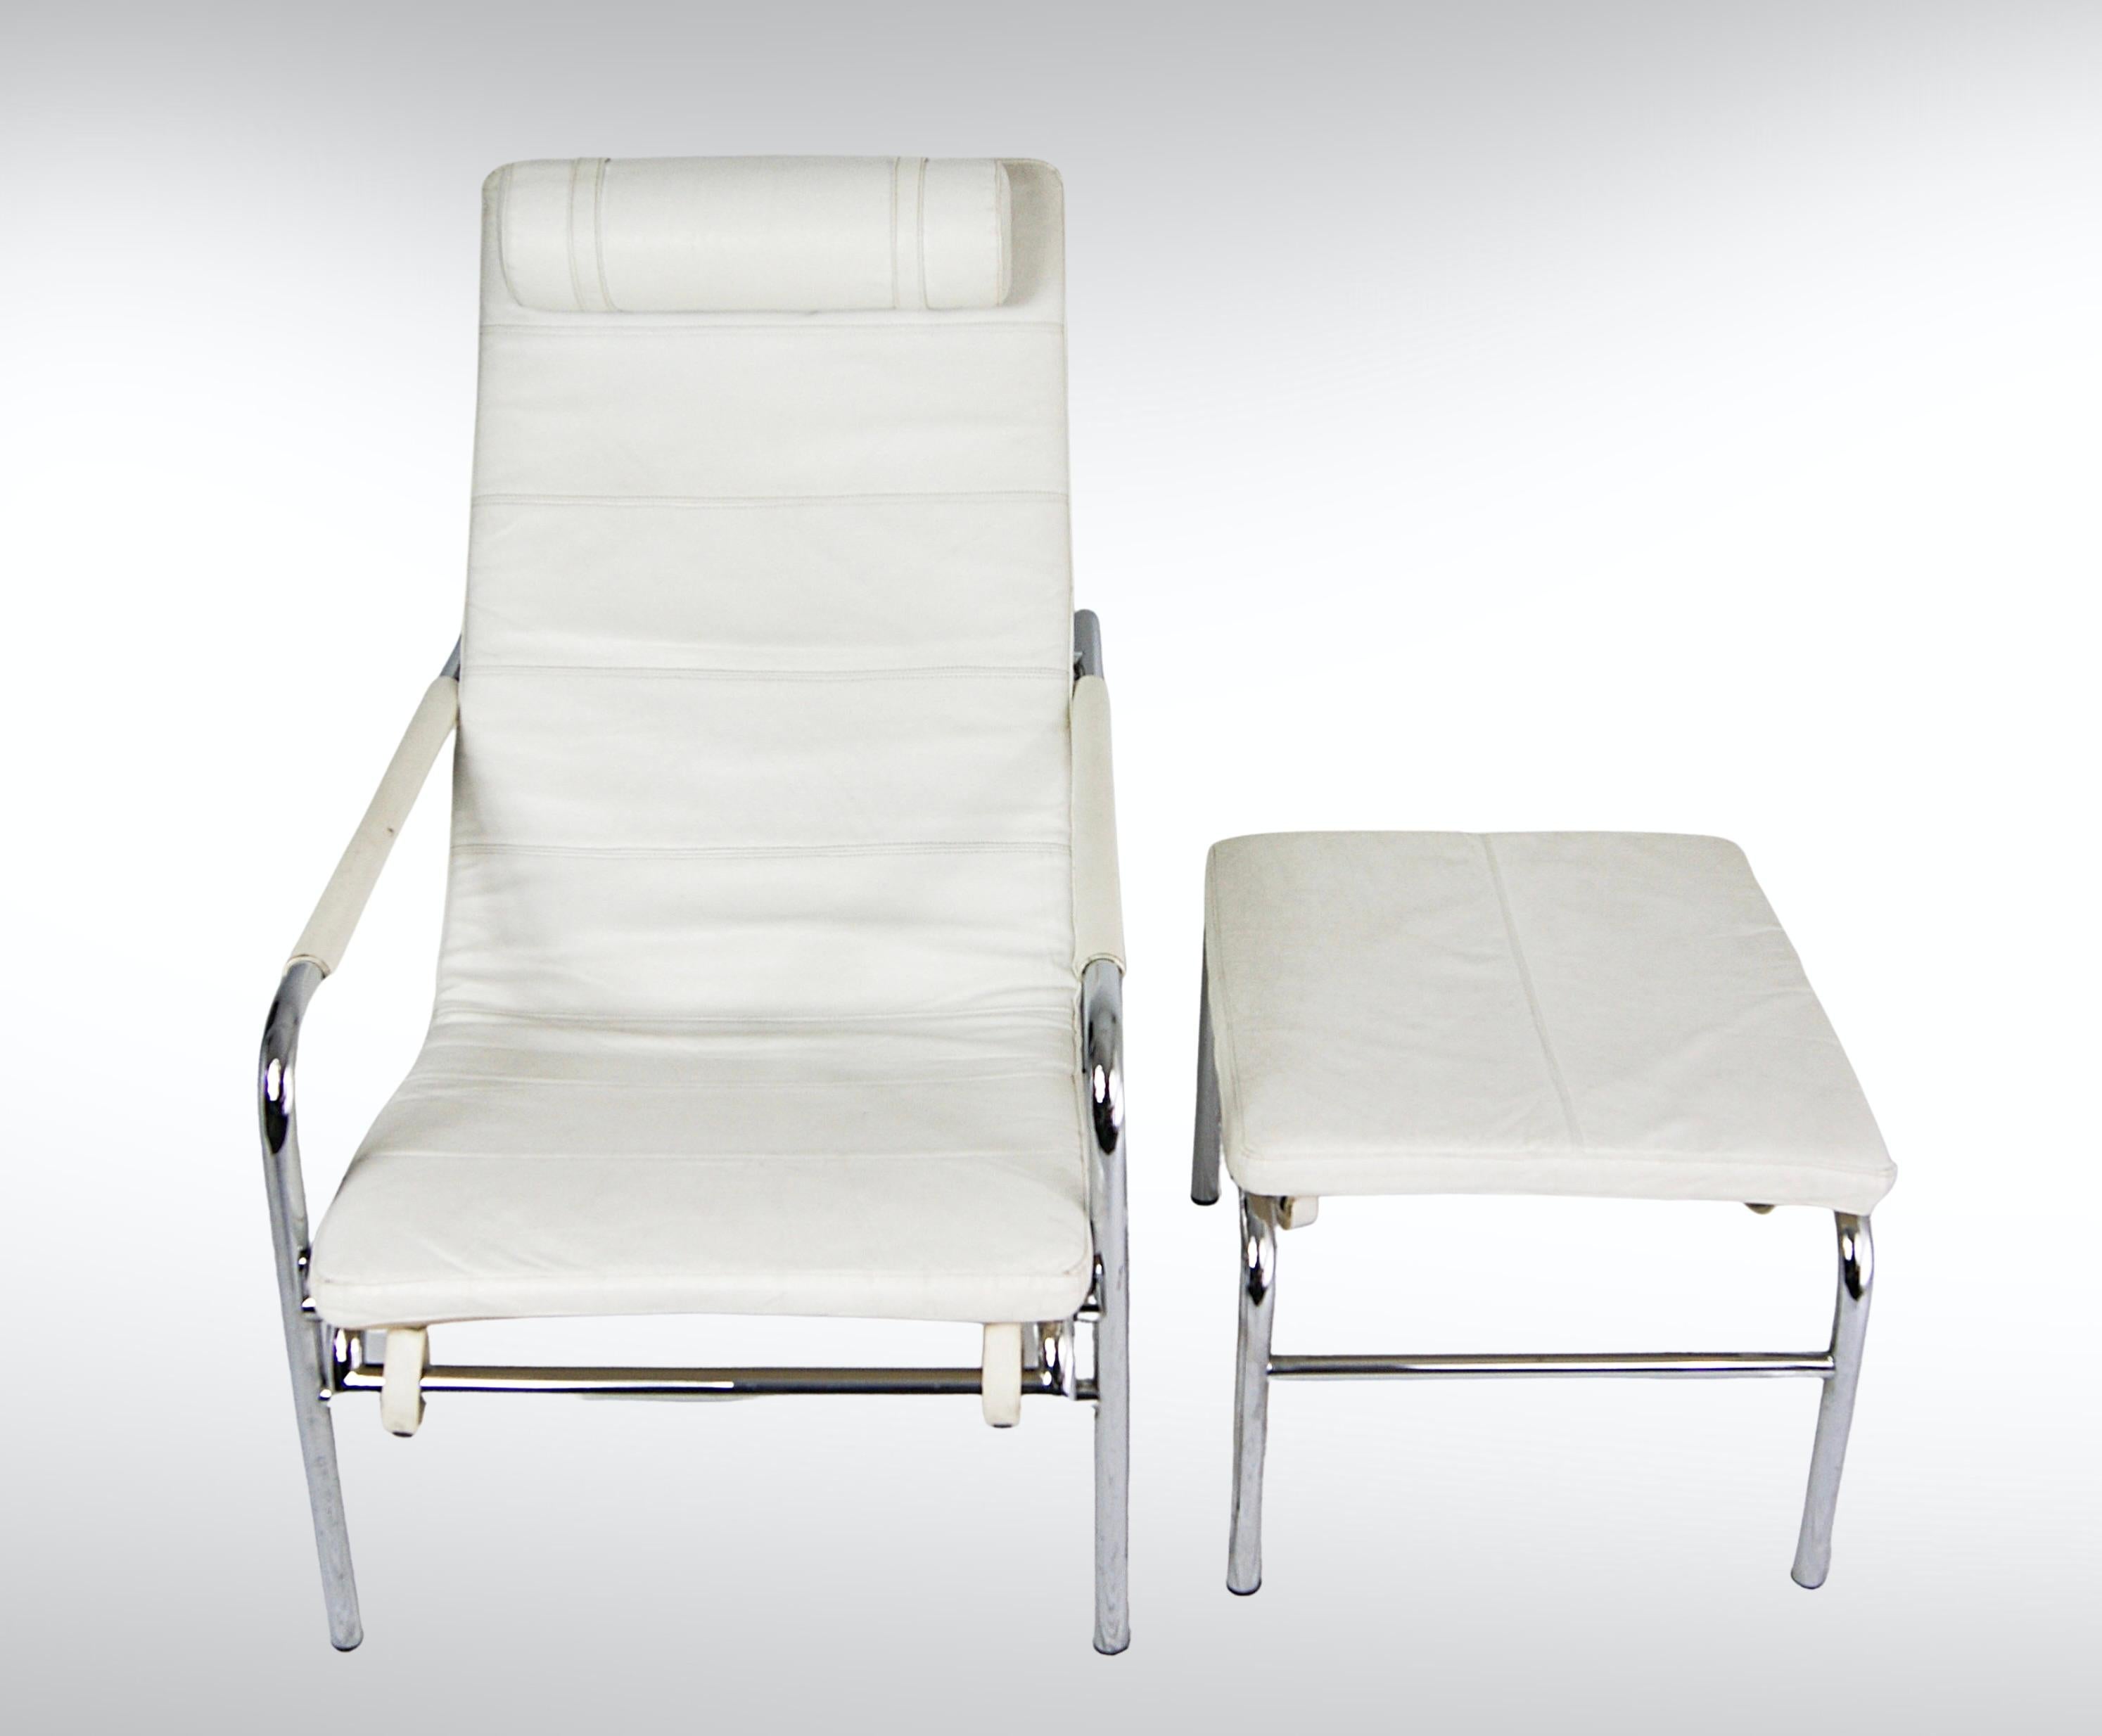 Zanotta leather Reclining Lounge Chair & Ottoman Footstool.
The 'Genni', designed in 1935 by Gabriele Mucchi. 
This set is manufactured by Zanotta, circa 1980s.
Covered in supple Nappa leather in color white and resting on a stainless steel and